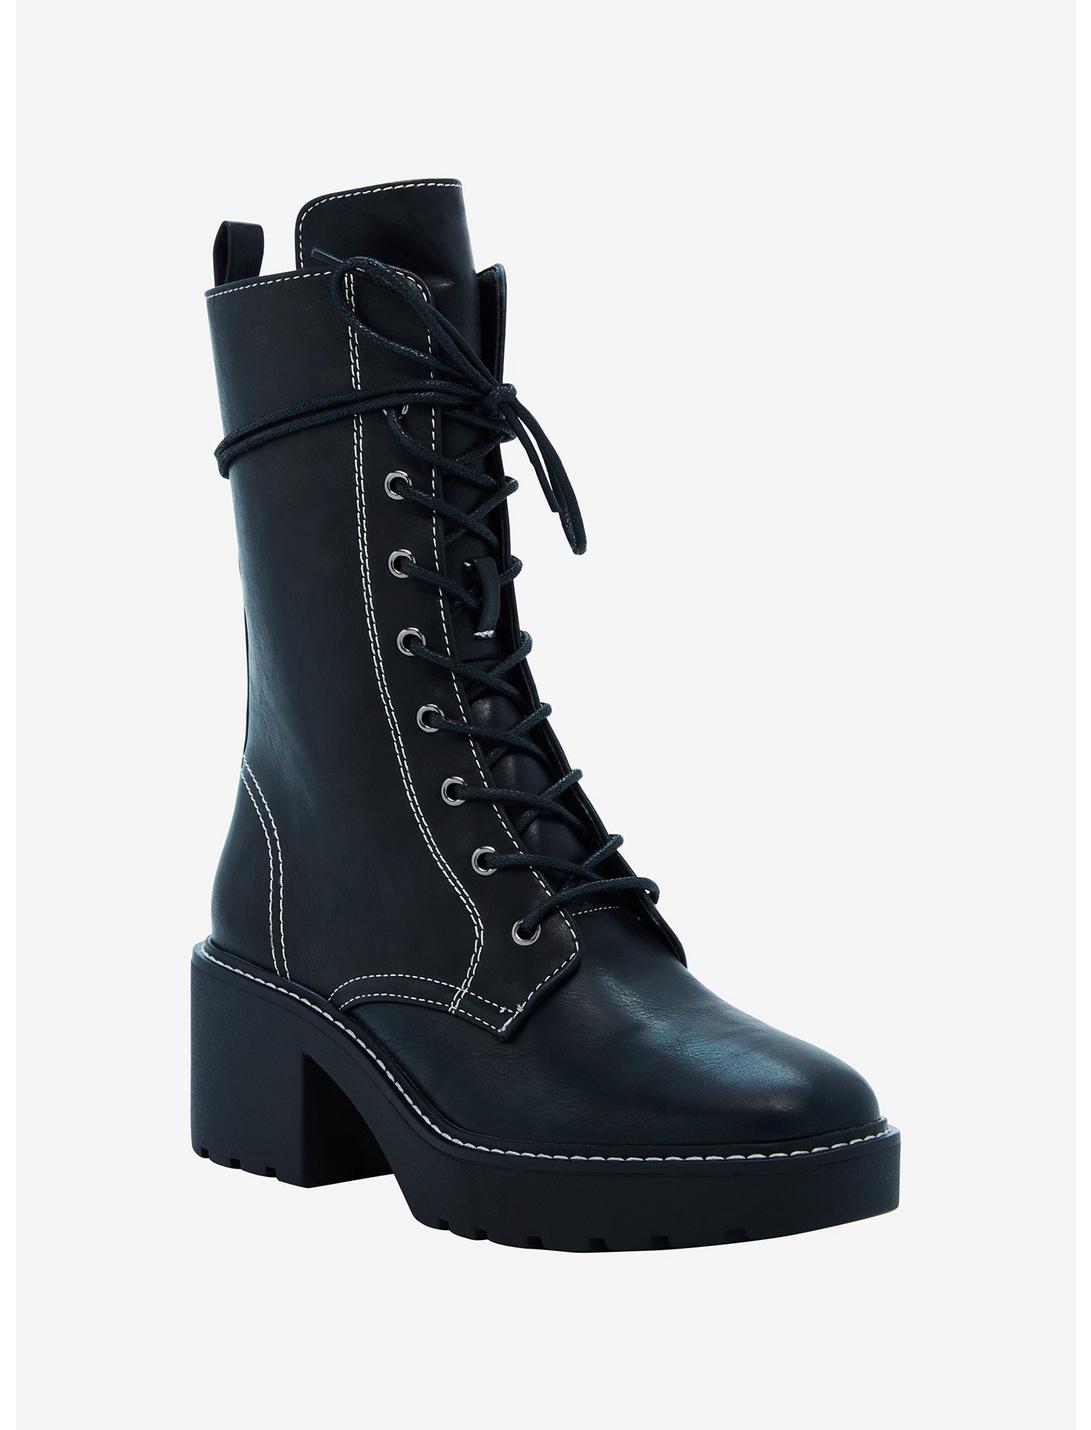 Chinese Laundry Black & White Contrast Stitch Combat Boots, MULTI, hi-res